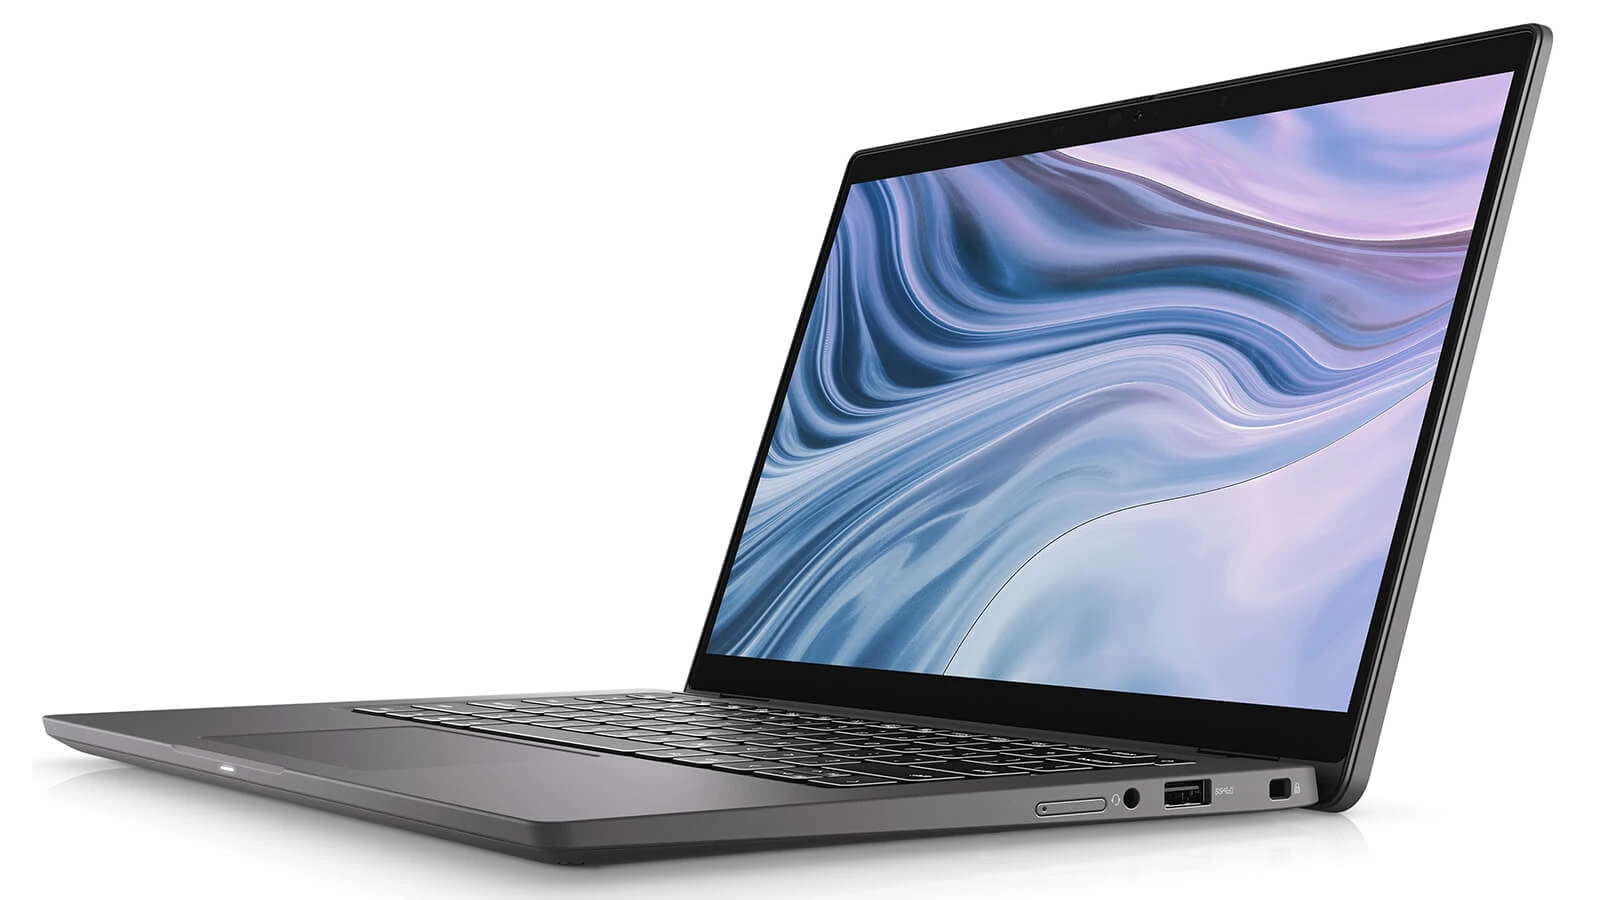 Dell Latitude 7310 (2020) Features 01